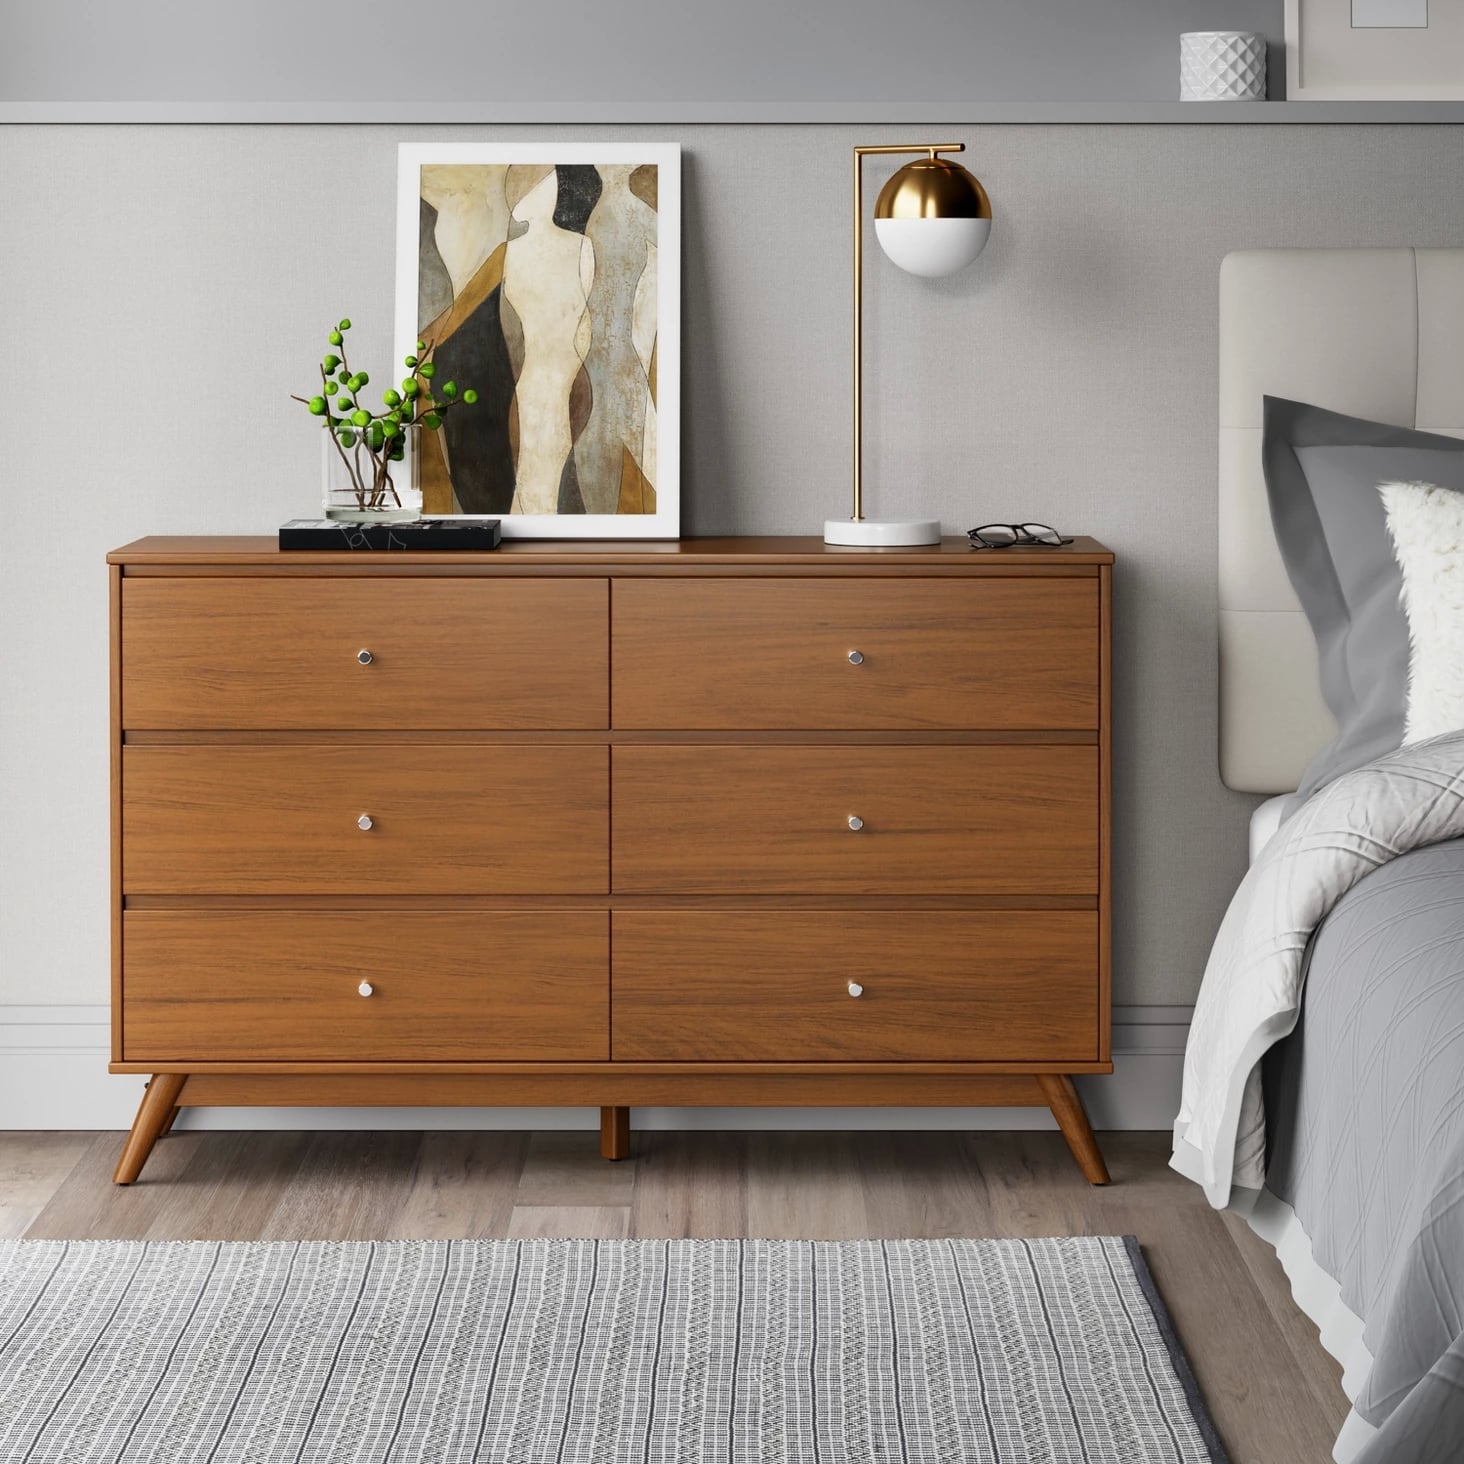 Amherst Horizontal Dresser Small Bedroom Cramping Your Style